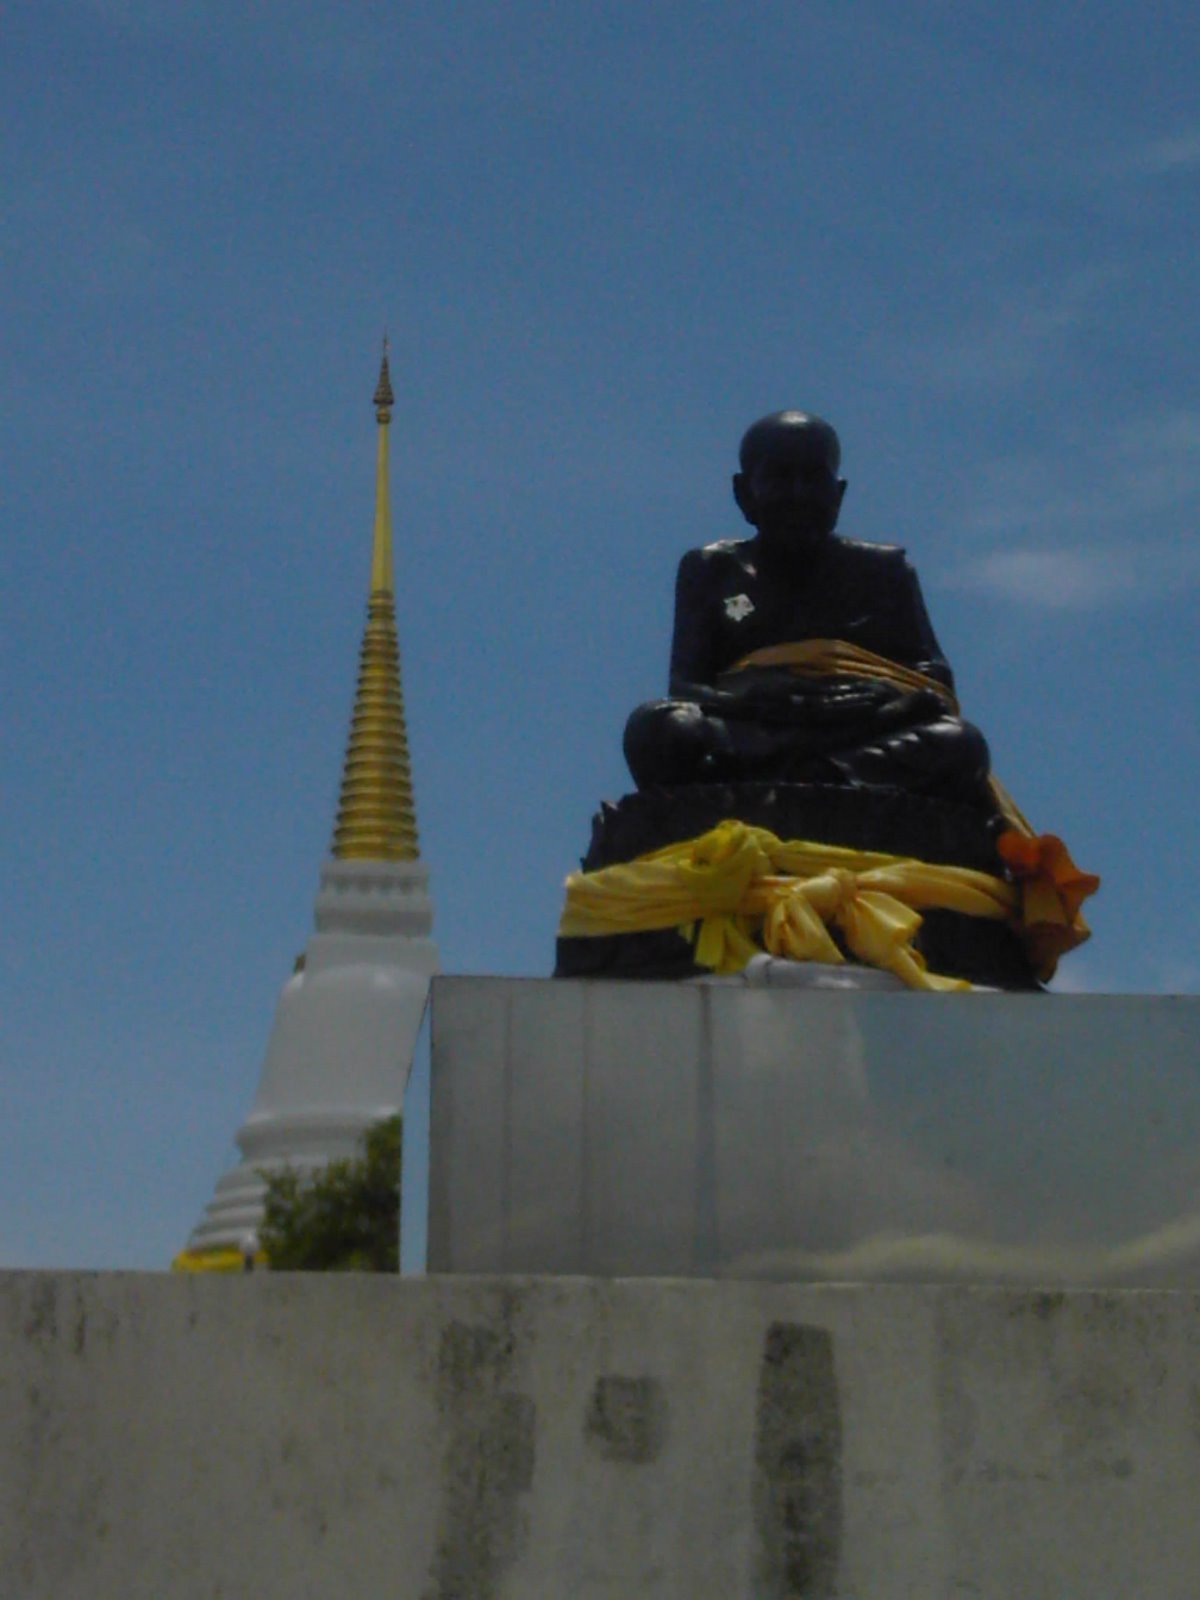 [The+Chedi+and+the+monk.JPG]